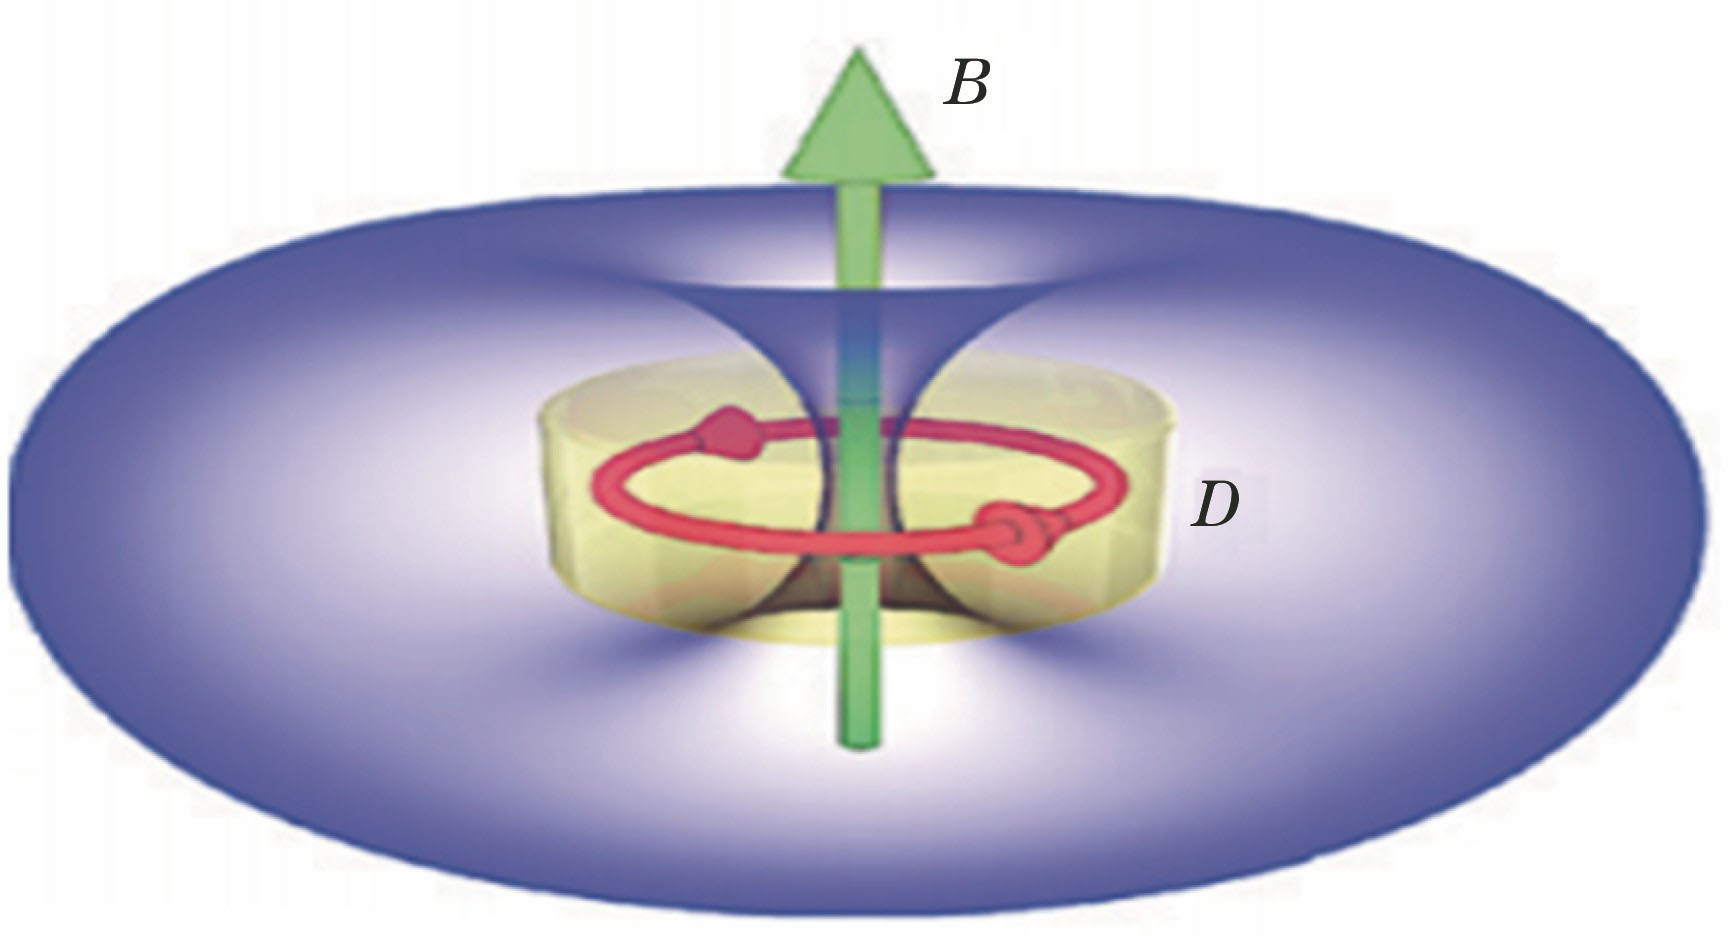 Schematic of magnetic-dipole moment excited in all-dielectric nanoparticles[35]